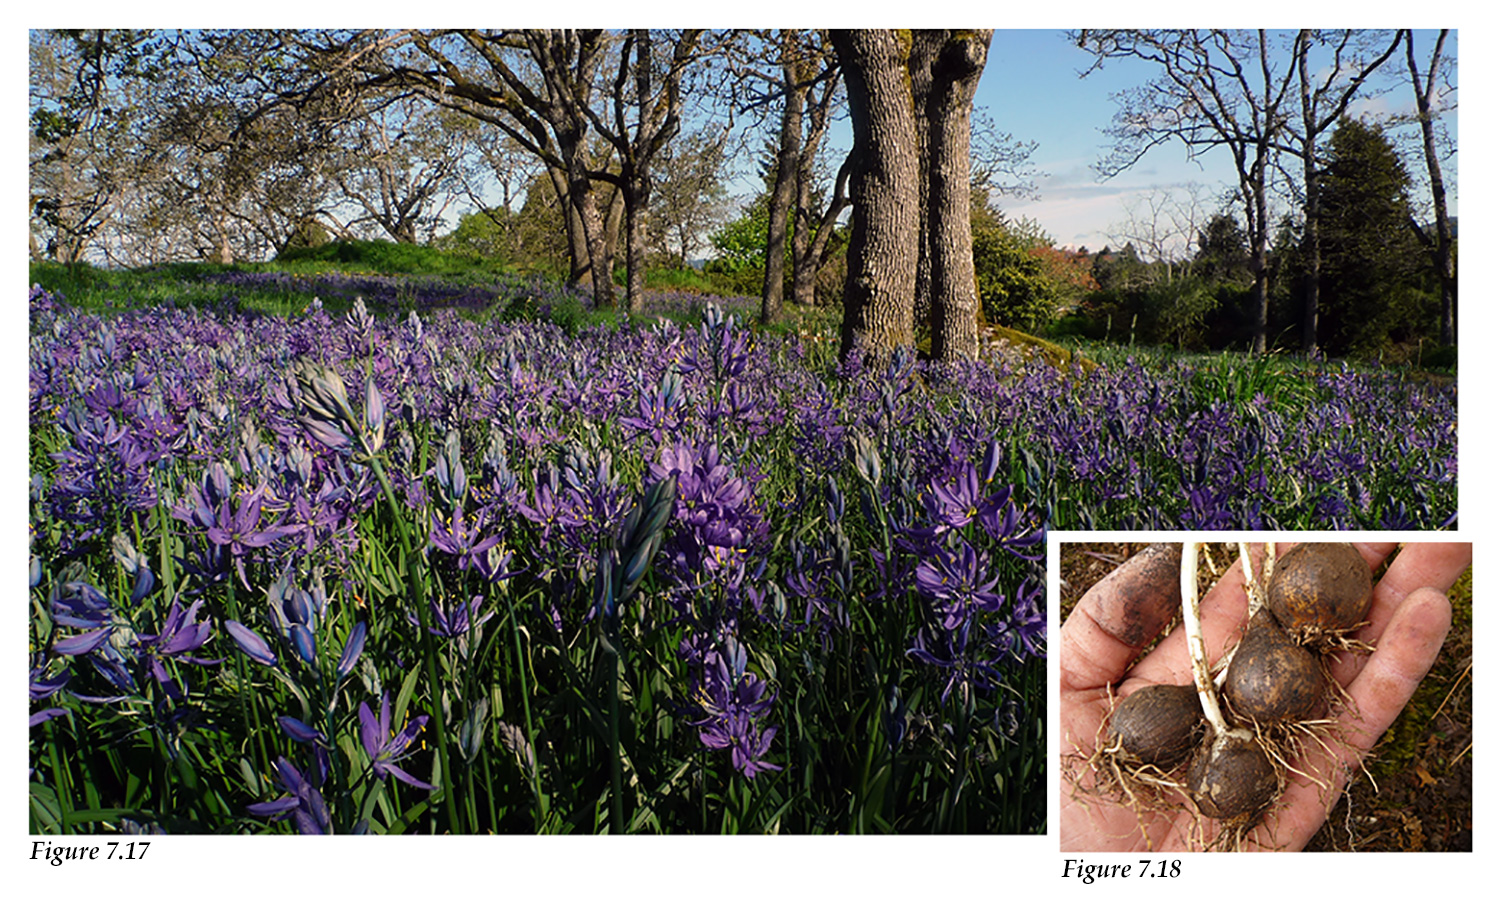 Garry oak meadow with blue camas, roots, and bulbs